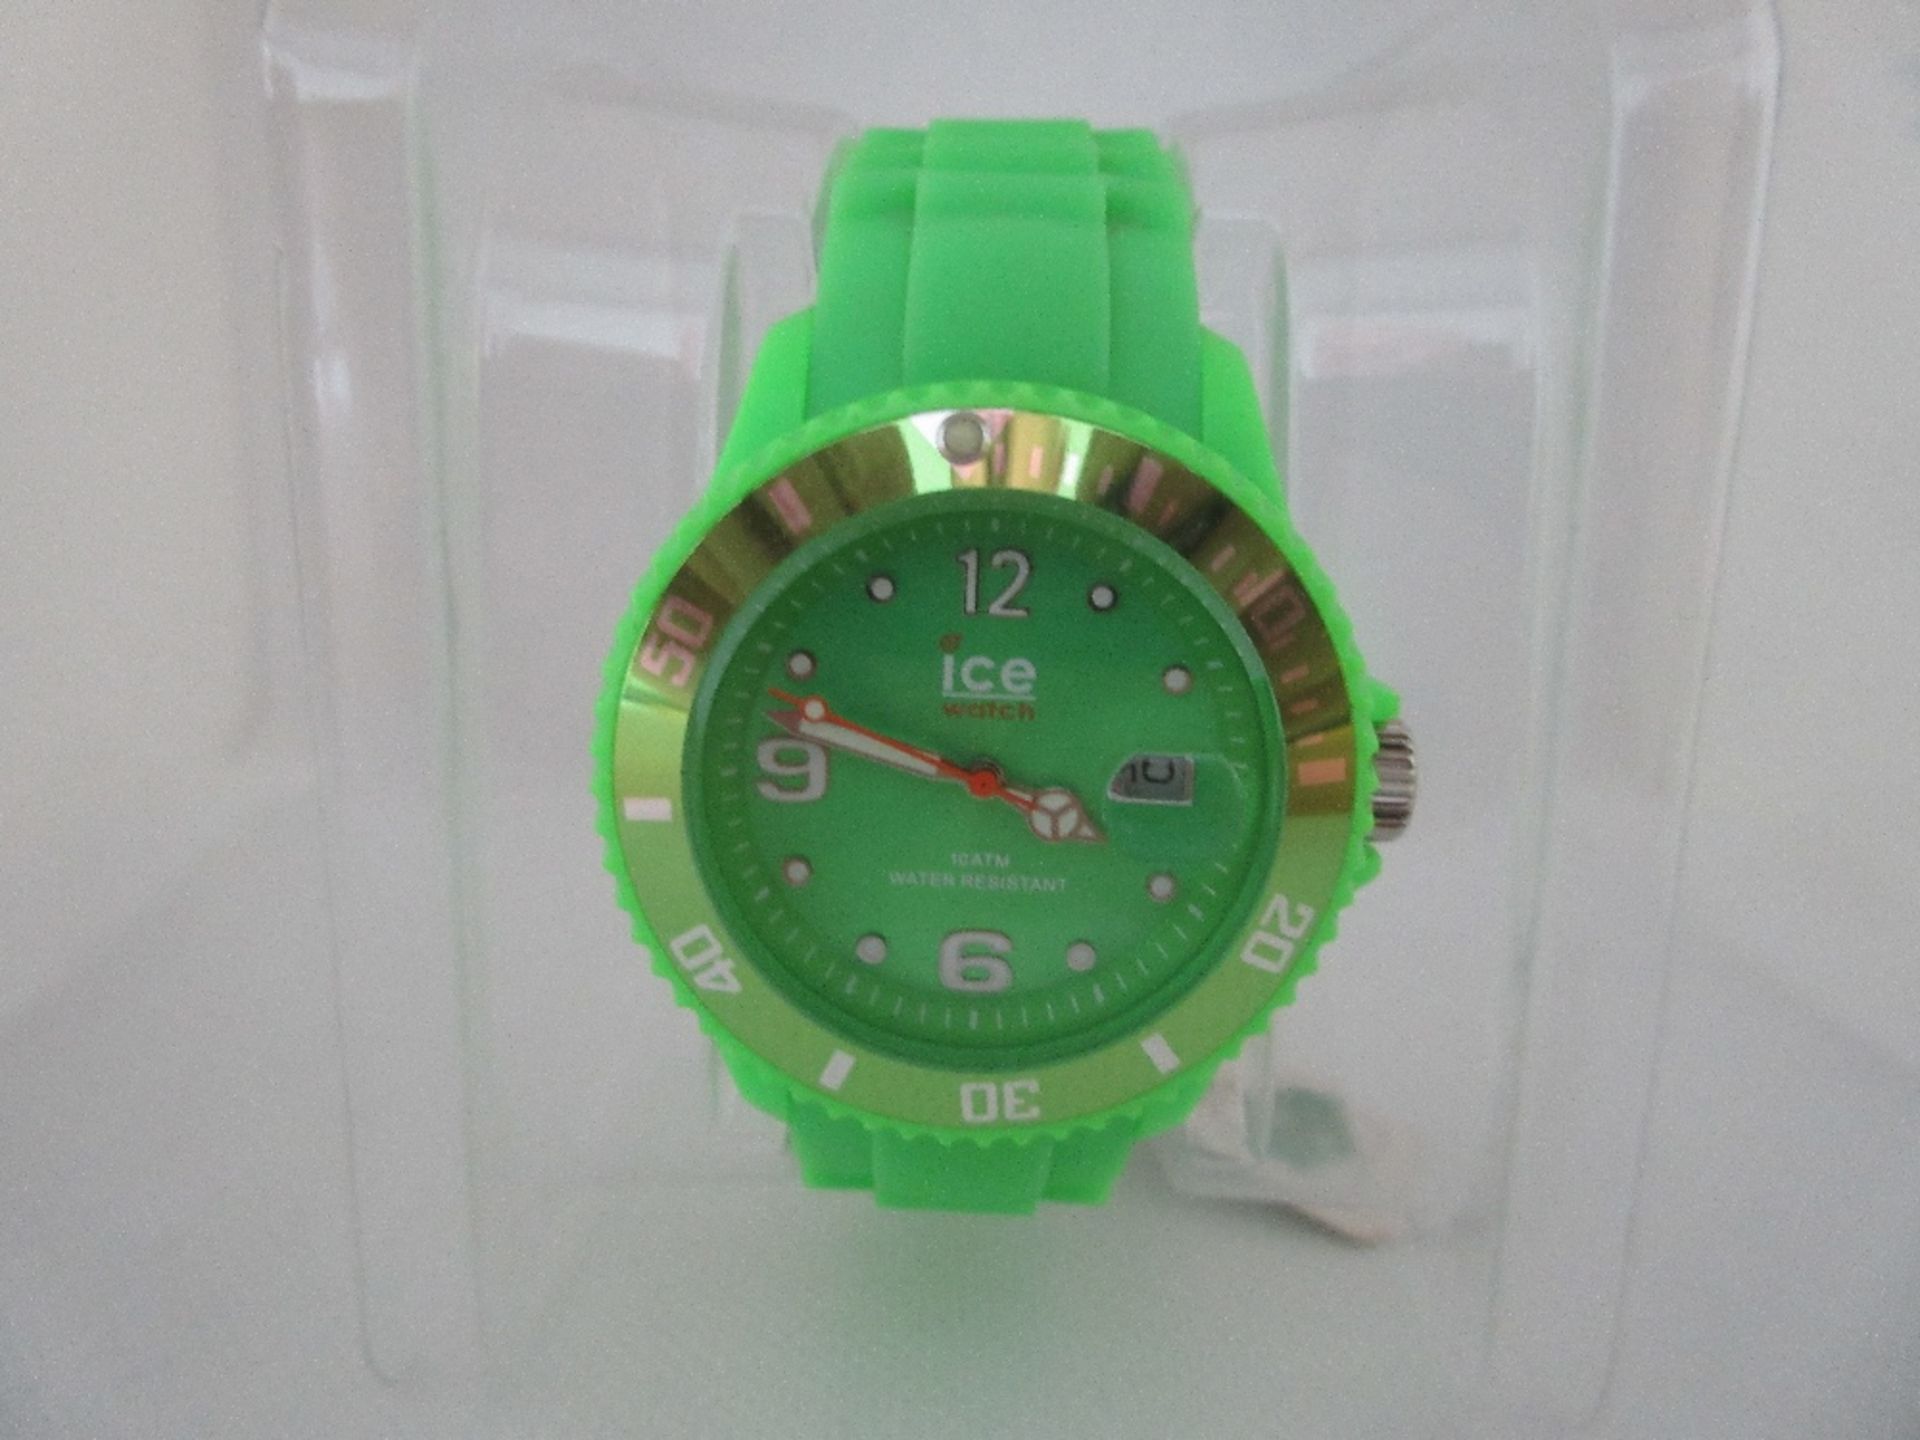 ICE WATCH UNISEX WATCH, MODEL SI.GN.U.S.09, RUBBER STRAP, BOXED, RRP £ 79.95 - Image 2 of 4